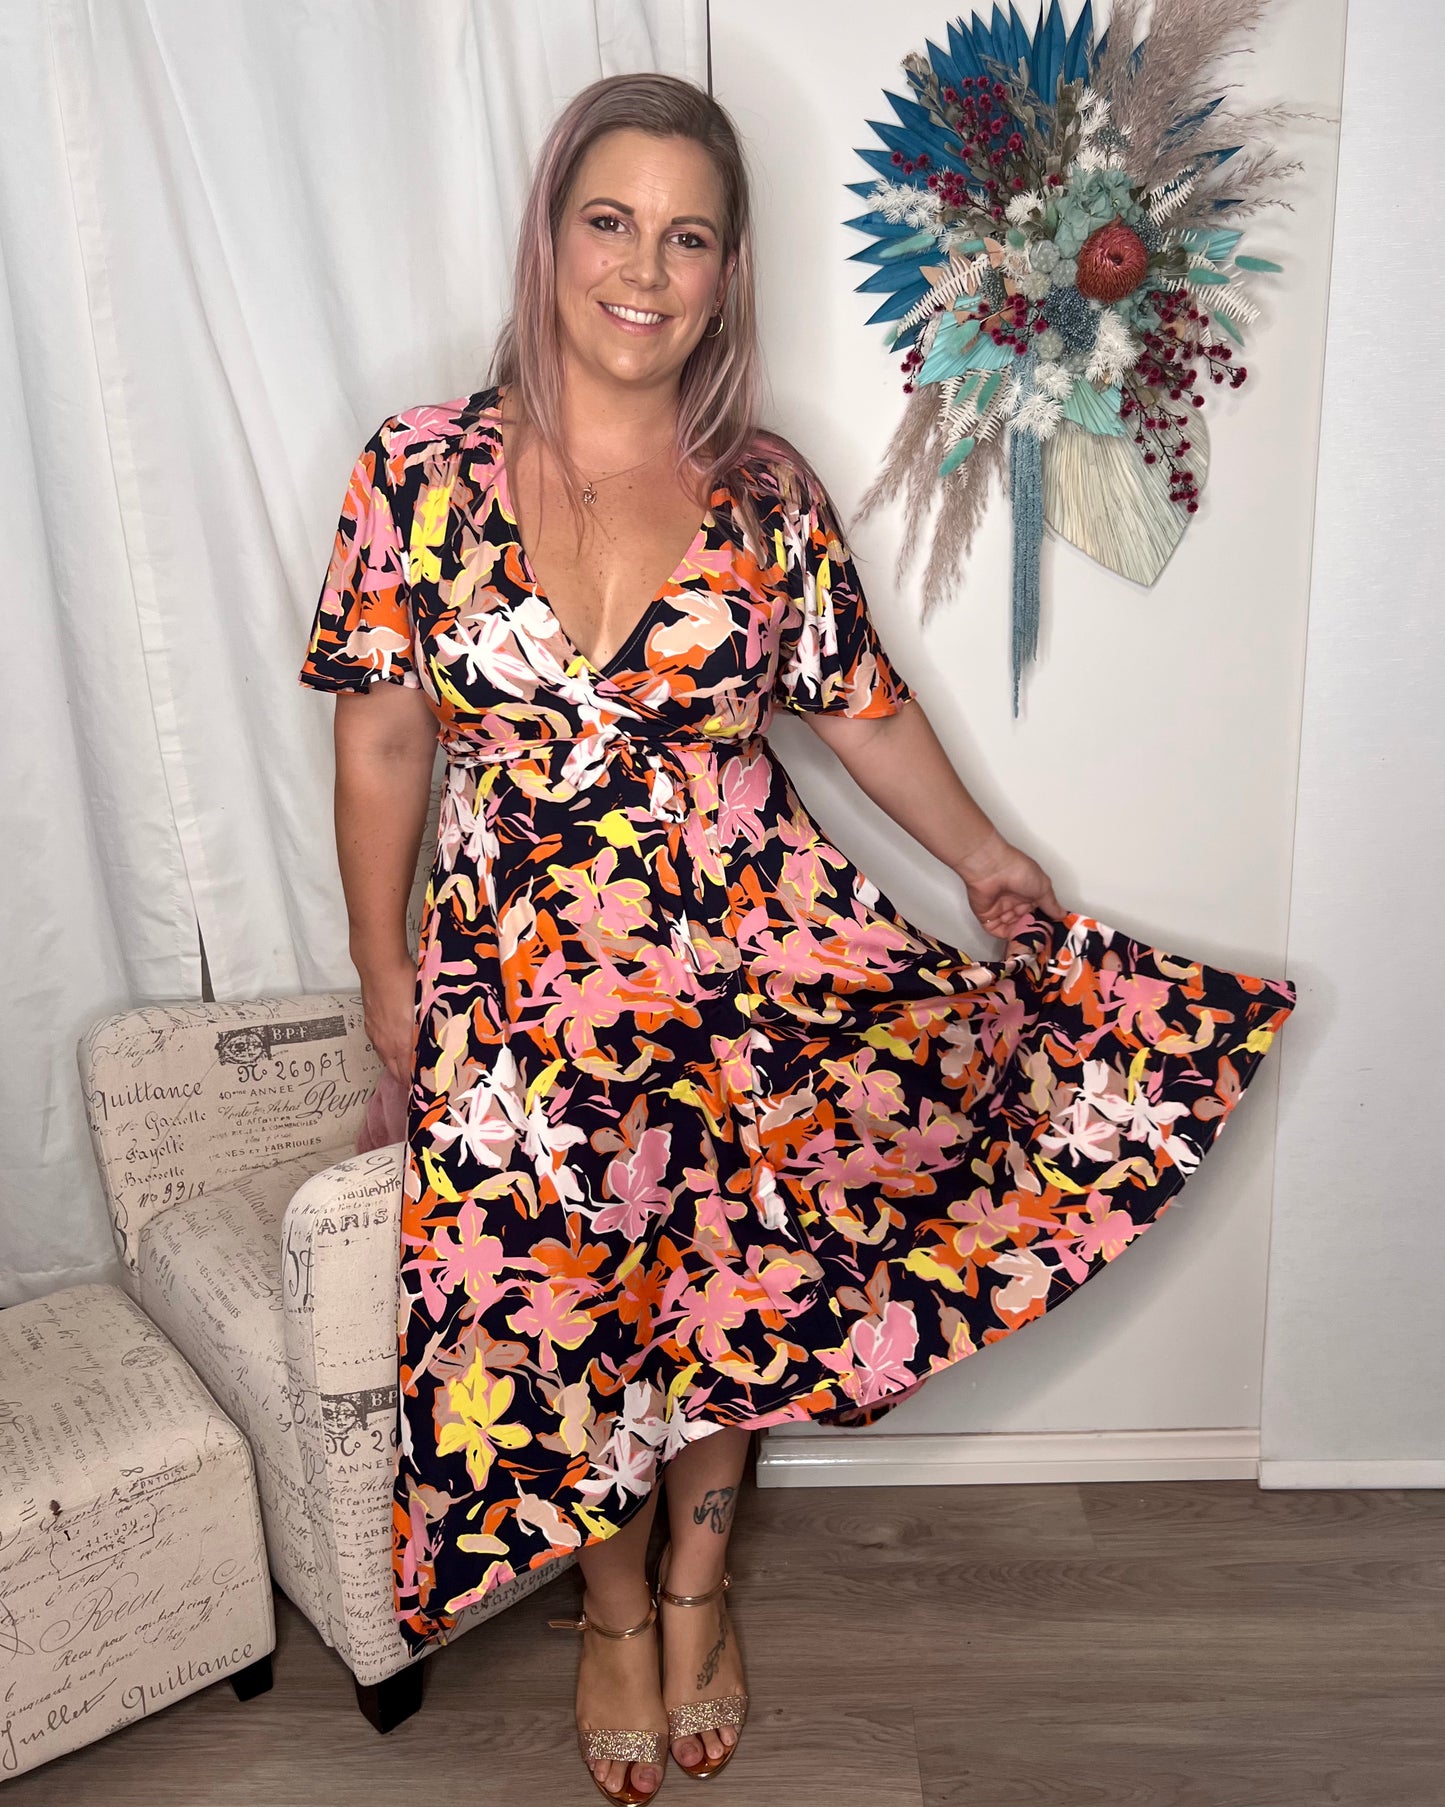 Serena Wrap Dress - Navy Floral: The perfect date night dress is here. This stunning wrap dress comes in a beautiful navy floral print with high-low hem
Features:

Breastfeeding friendly
True wrap d - Ciao Bella Dresses 